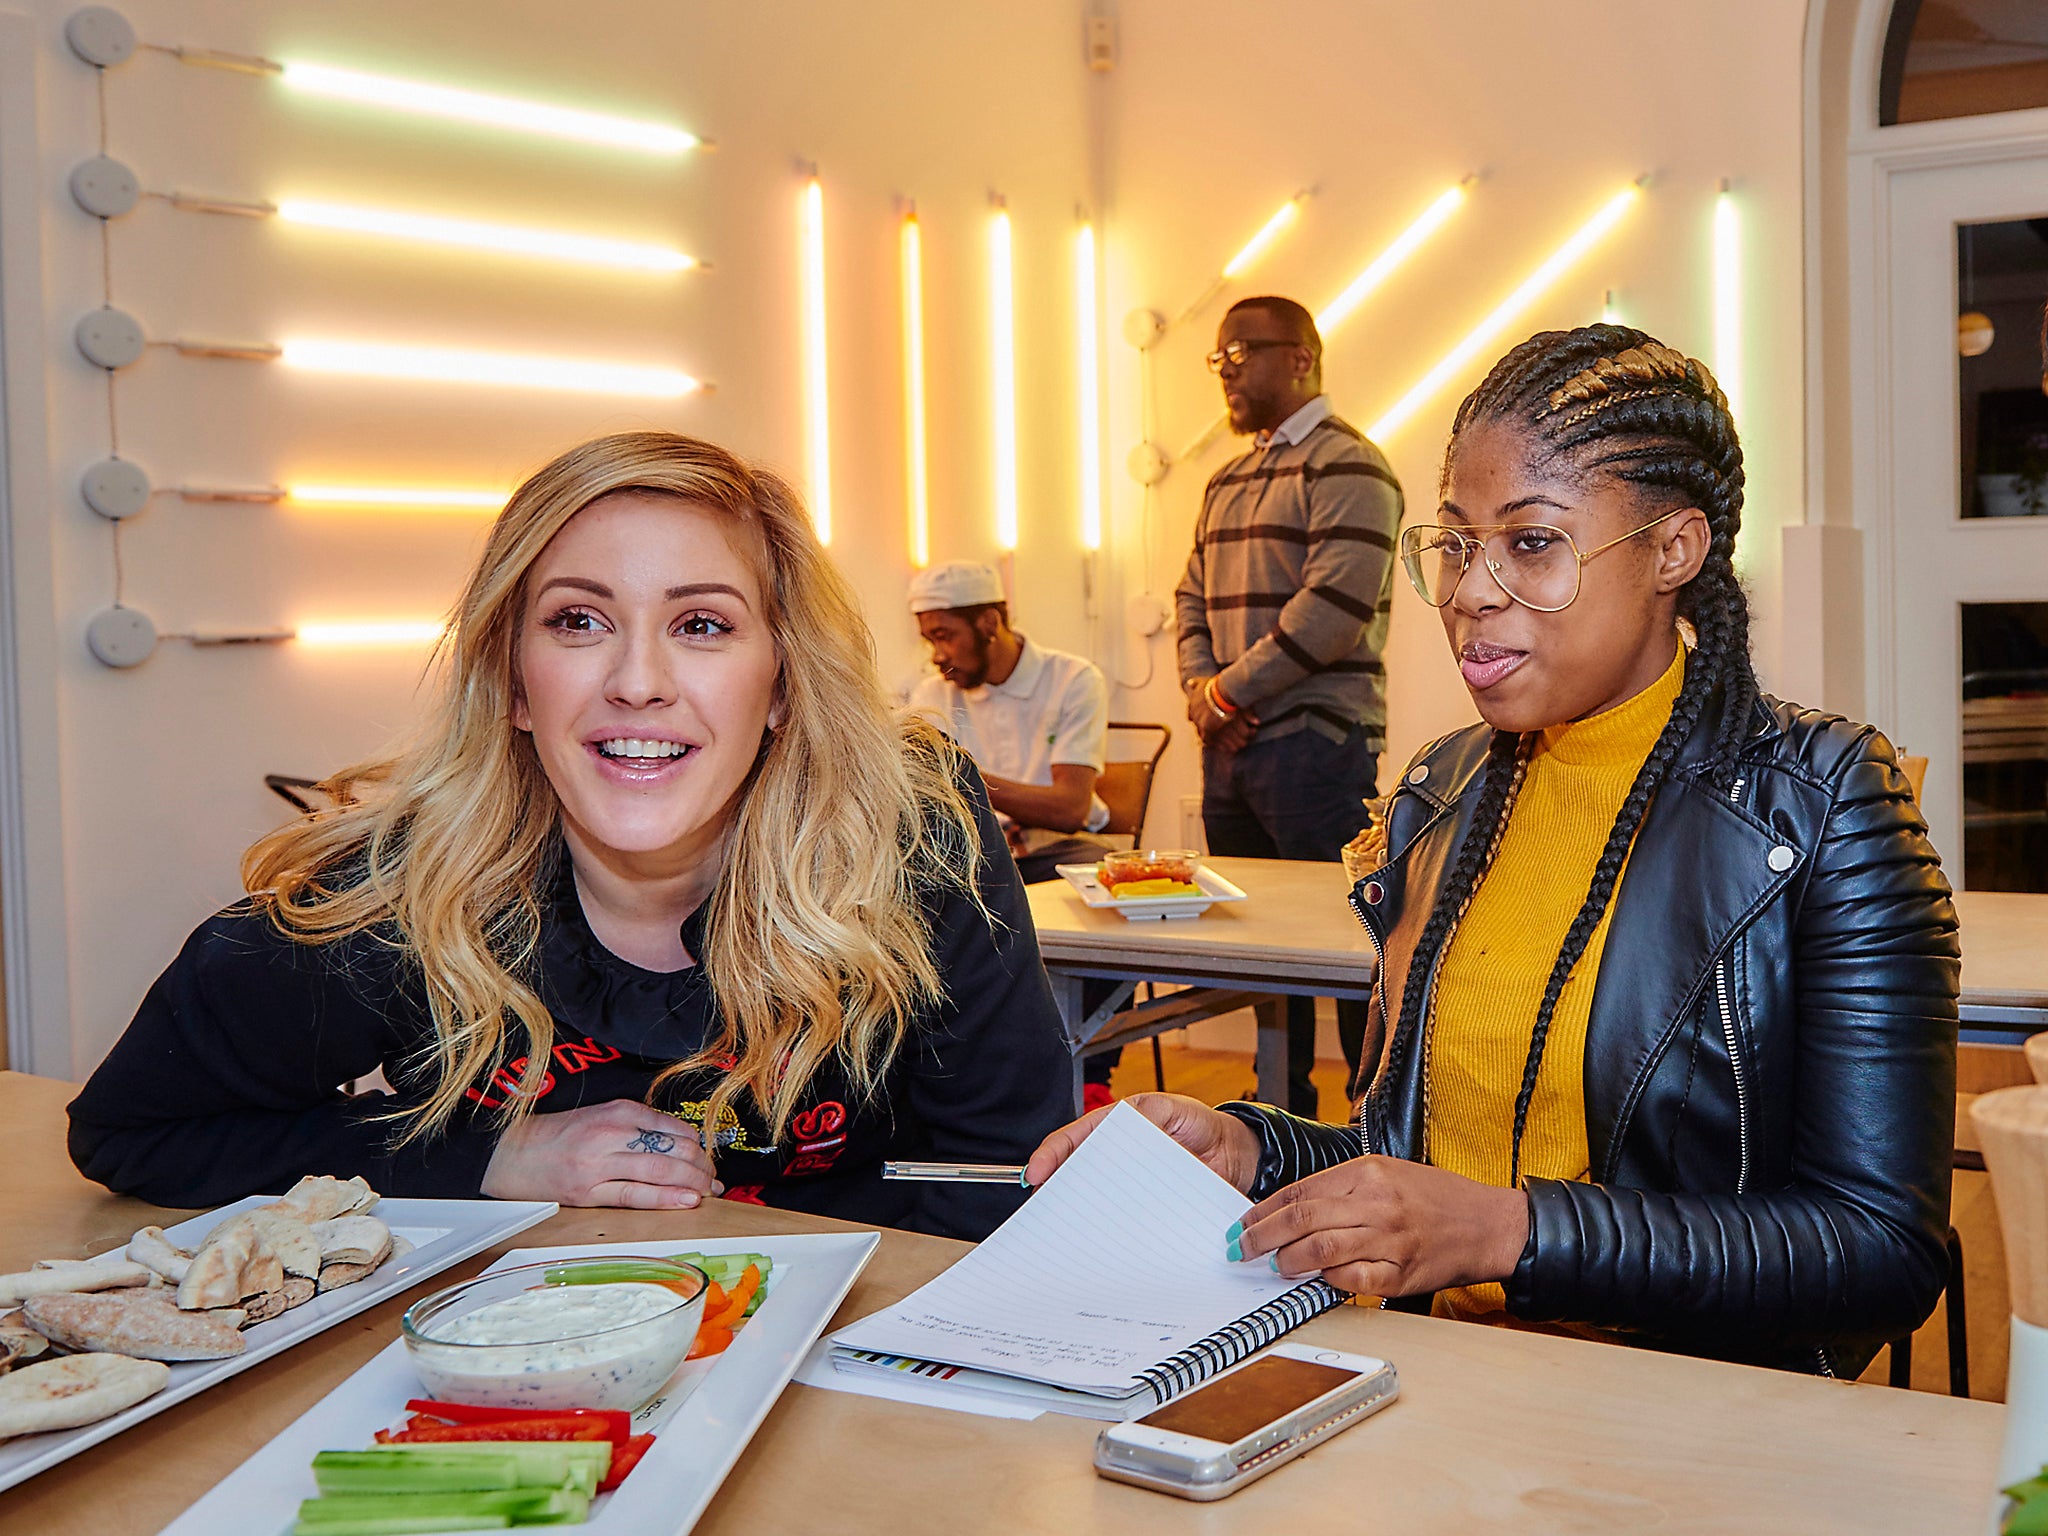 Ellie Goulding, seen here on a recent visit to a Centrepoint hostel, has backed the Homeless Helpline appeal